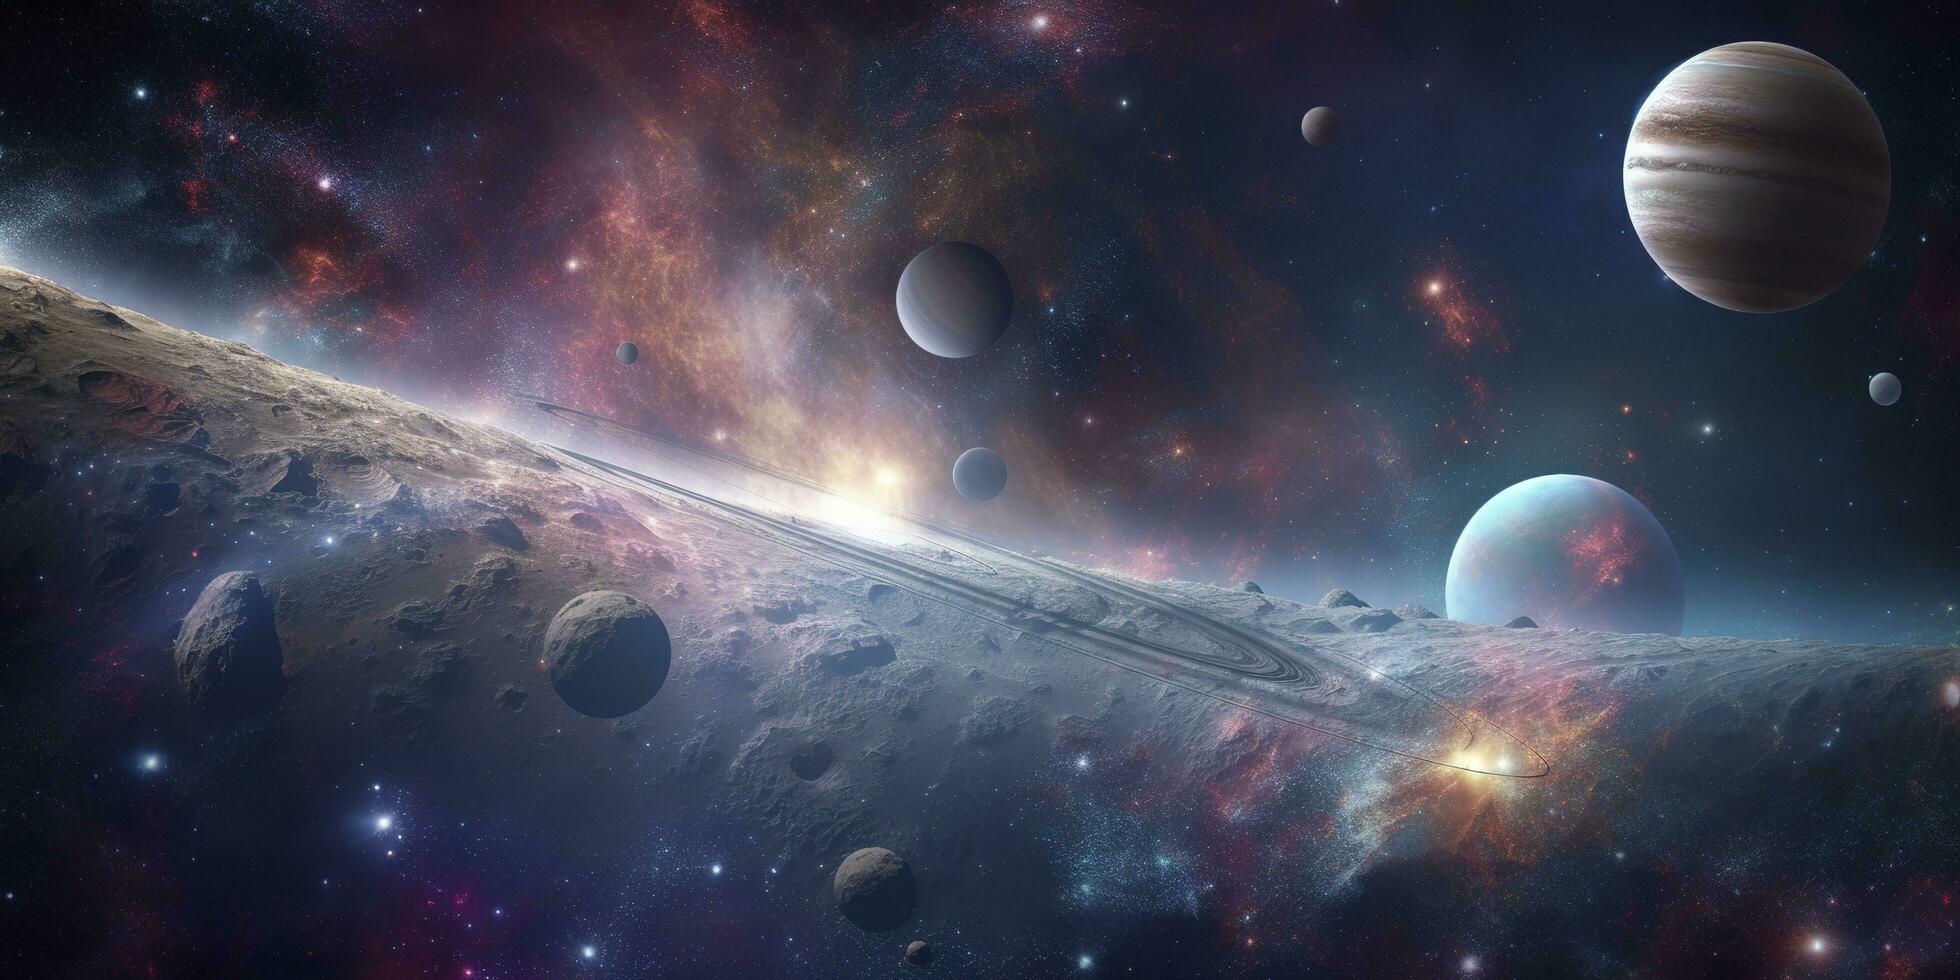 Space wallpaper banner background. Stunning view of a cosmic galaxy with planets and space objects. Elements of this image furnished by NASA, generate ai photo